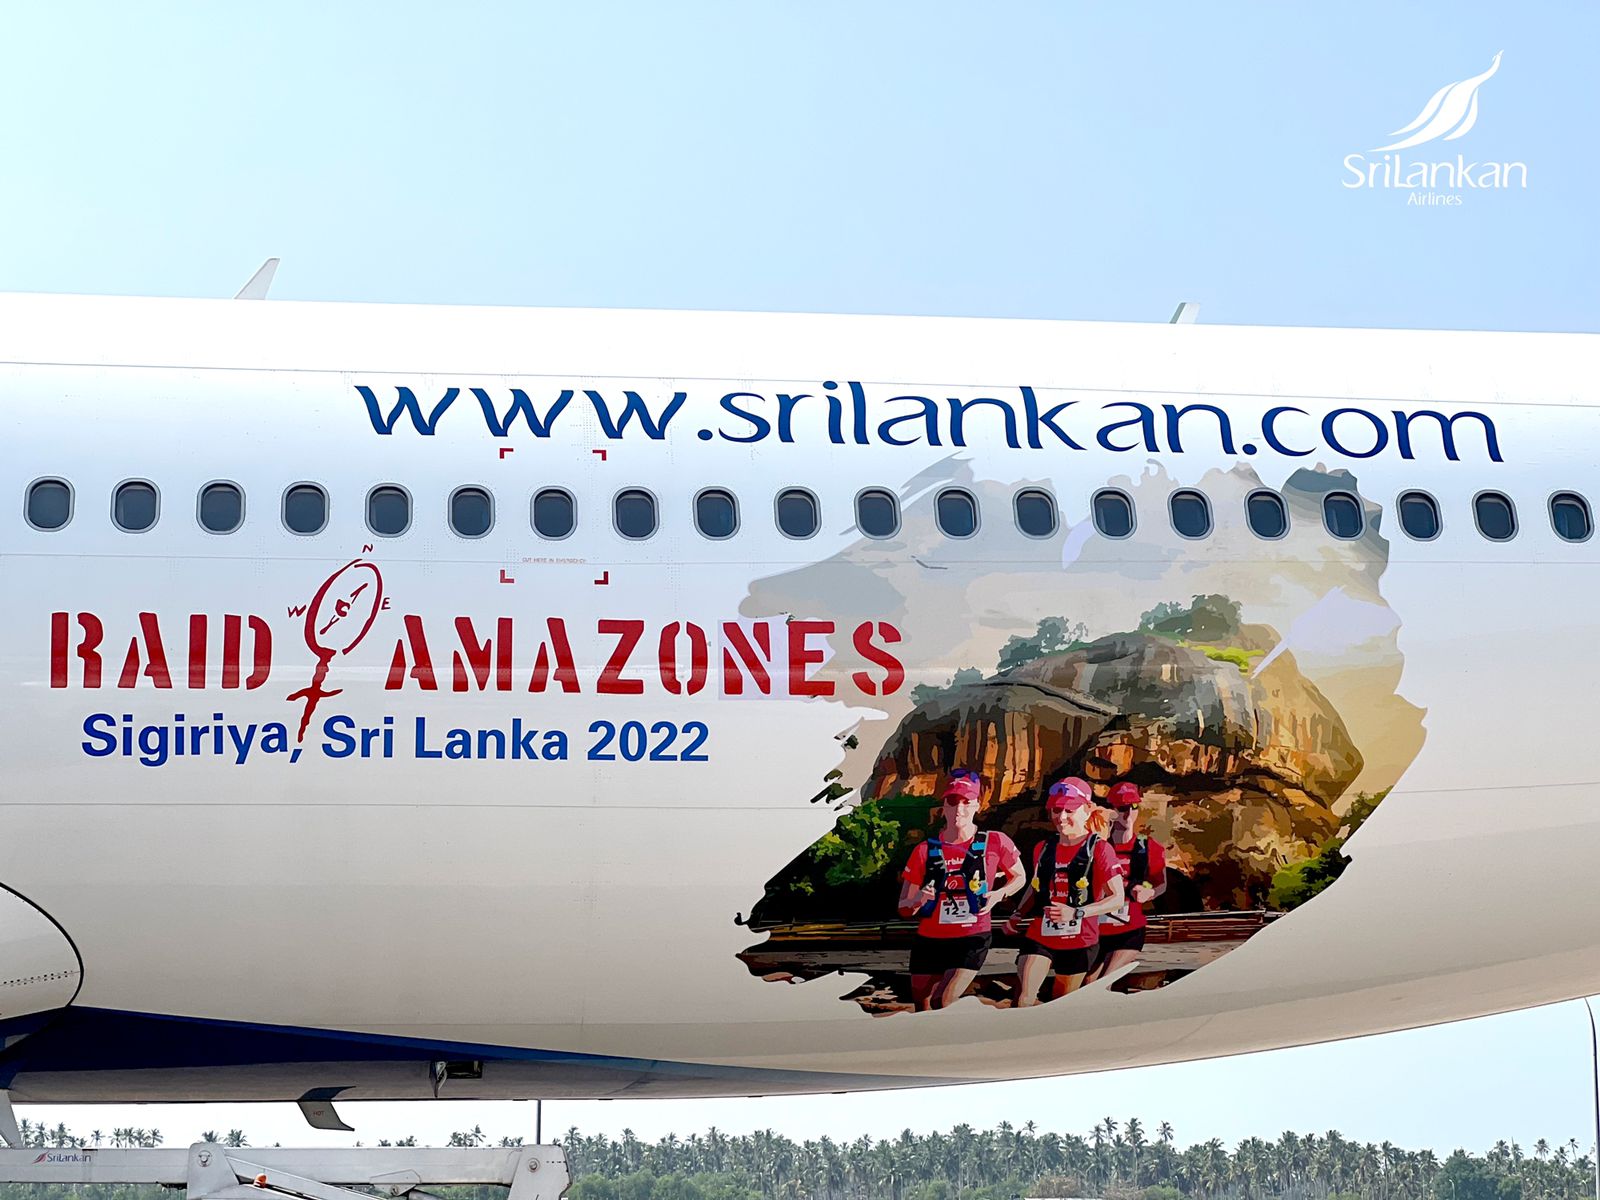 ‘Raid Amazones 2022’ livery for SriLankan Airlines aircraft